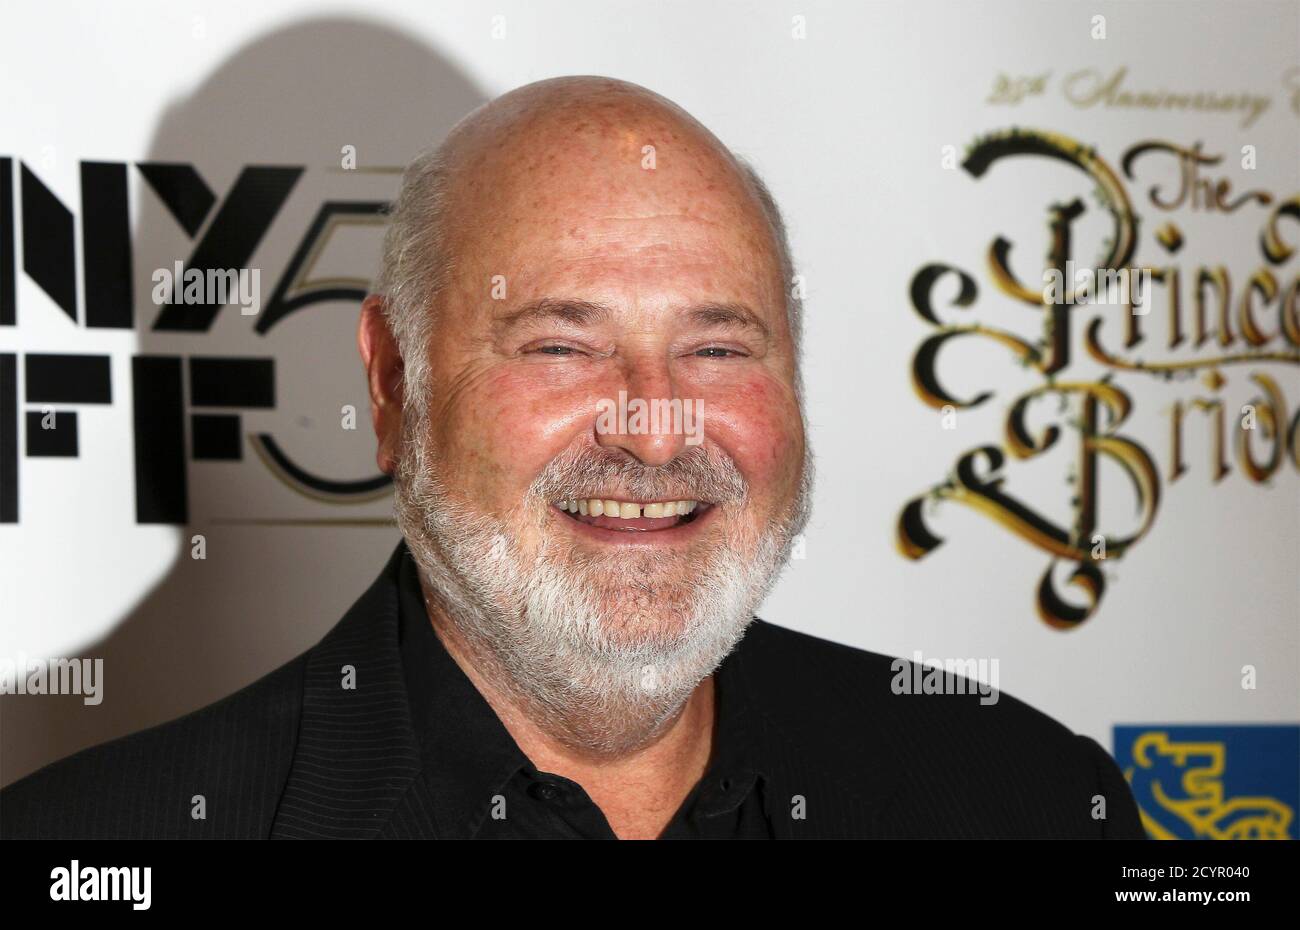 Rob Reiner, director of 'The Princess Bride,' arrives for a special 25th anniversary viewing of the film during the New York Film Festival in New York October 2, 2012. REUTERS/Lucas Jackson (UNITED STATES - Tags: ENTERTAINMENT HEADSHOT) Stock Photo